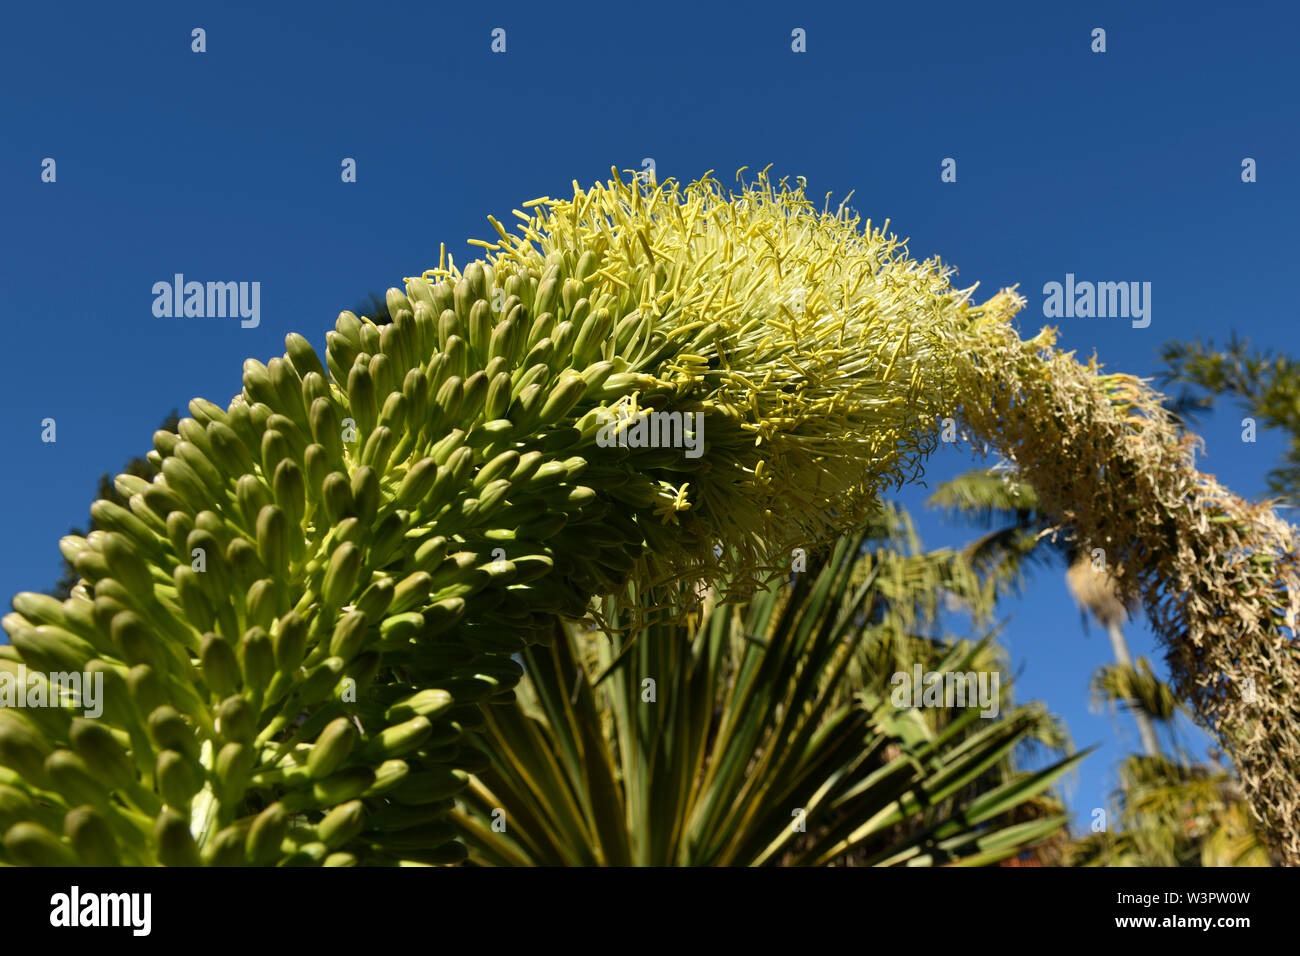 Section of flower spike of Agave attenuata (aka Agawa attenuata), showing hundreds of individual flowers in various stages of opening. Stock Photo